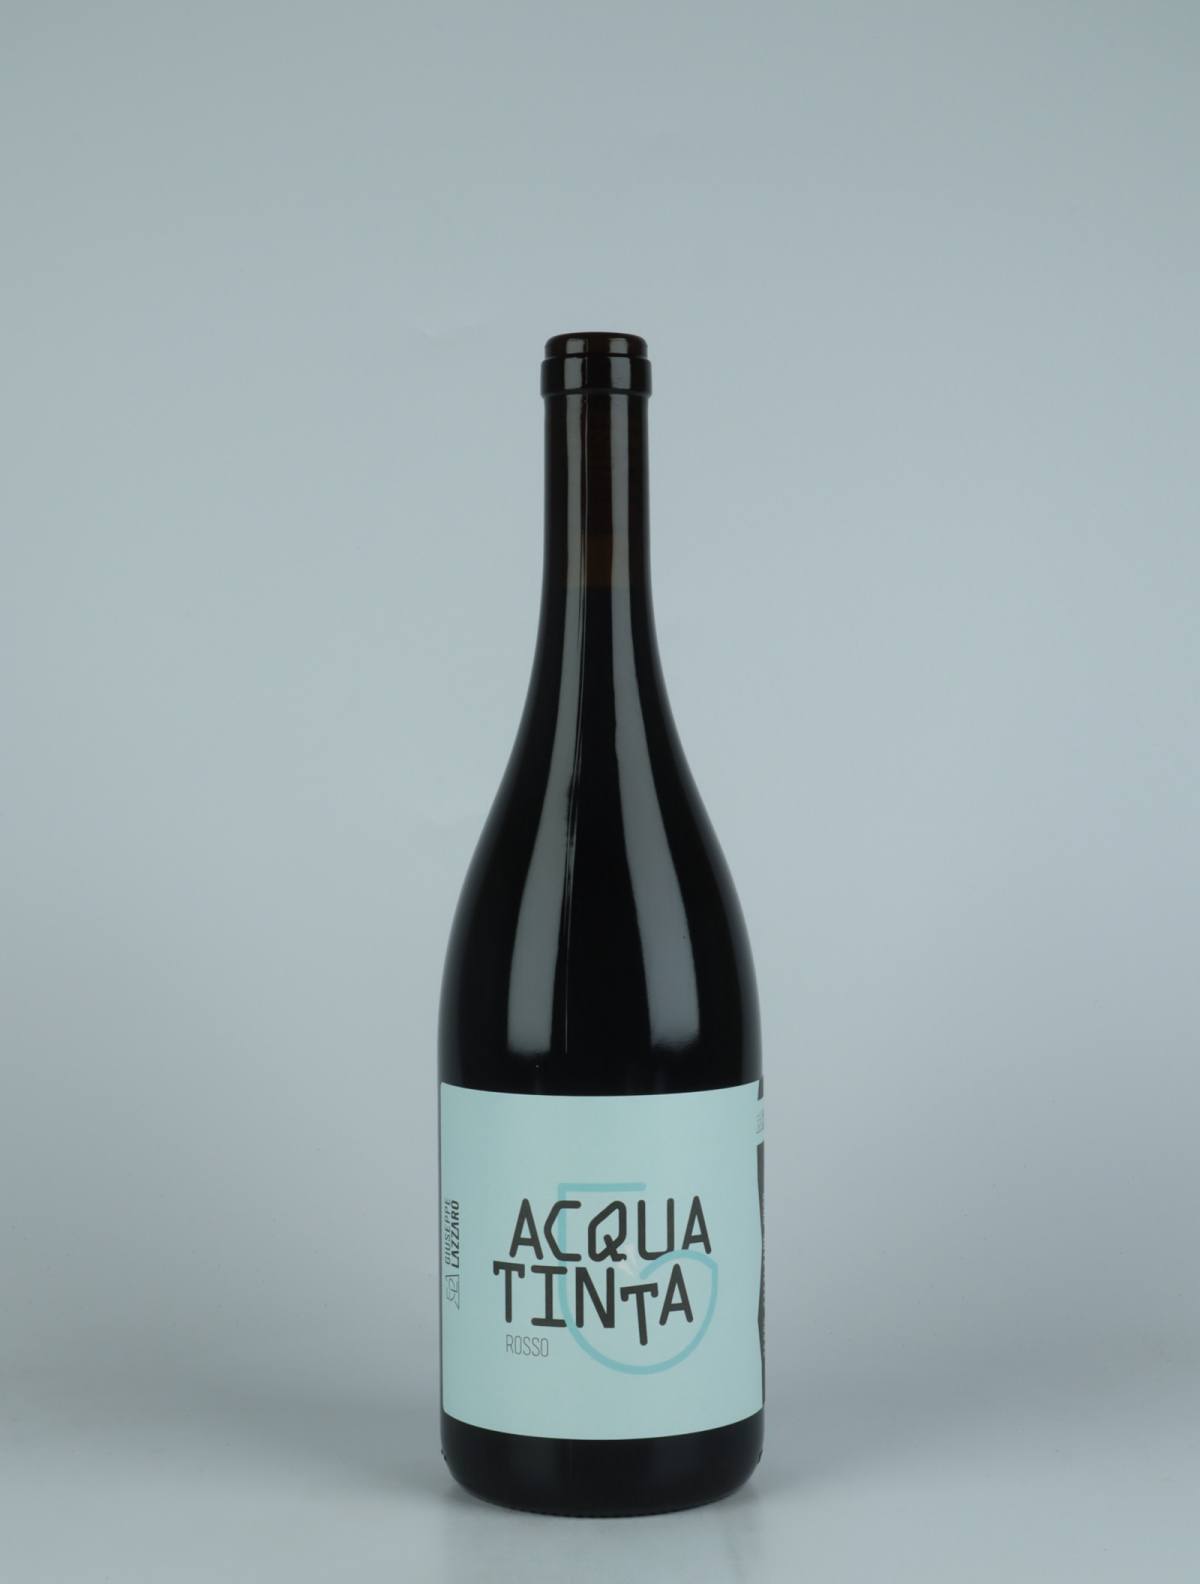 A bottle 2022 Acquatinta Red wine from Giuseppe Lazzaro, Sicily in Italy